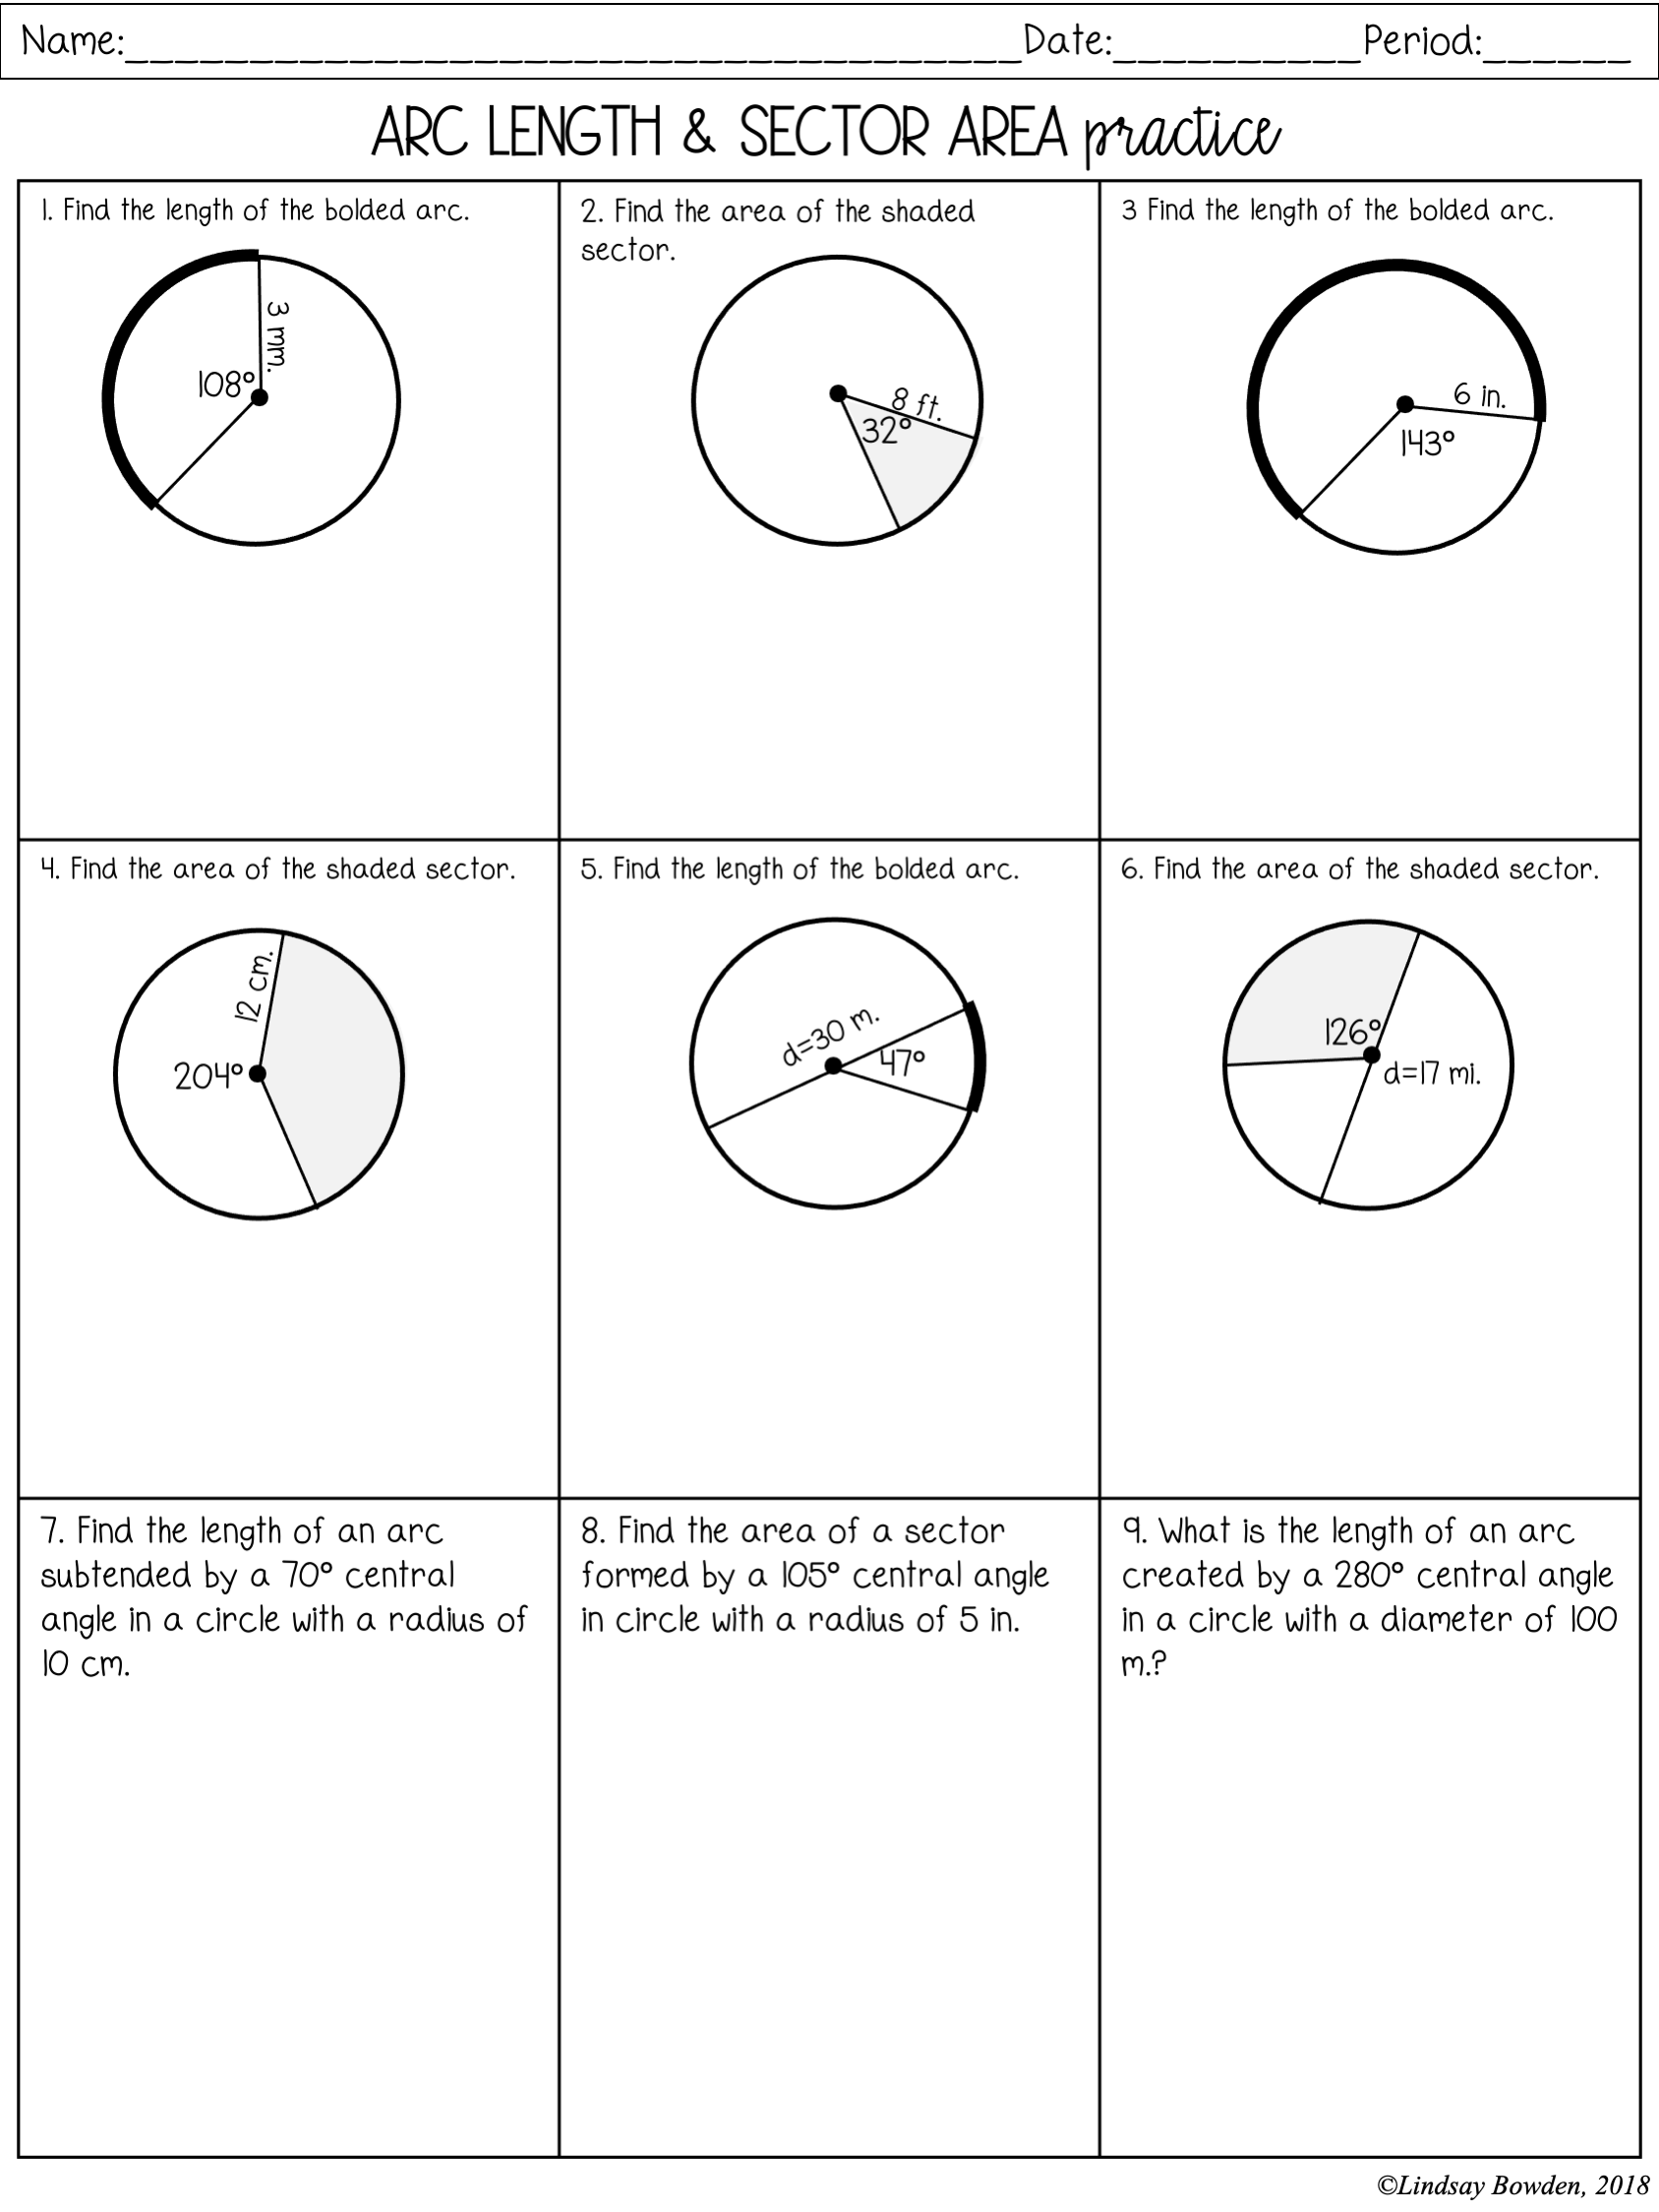 Arc Length And Sector Area Notes And Worksheets Lindsay Bowden